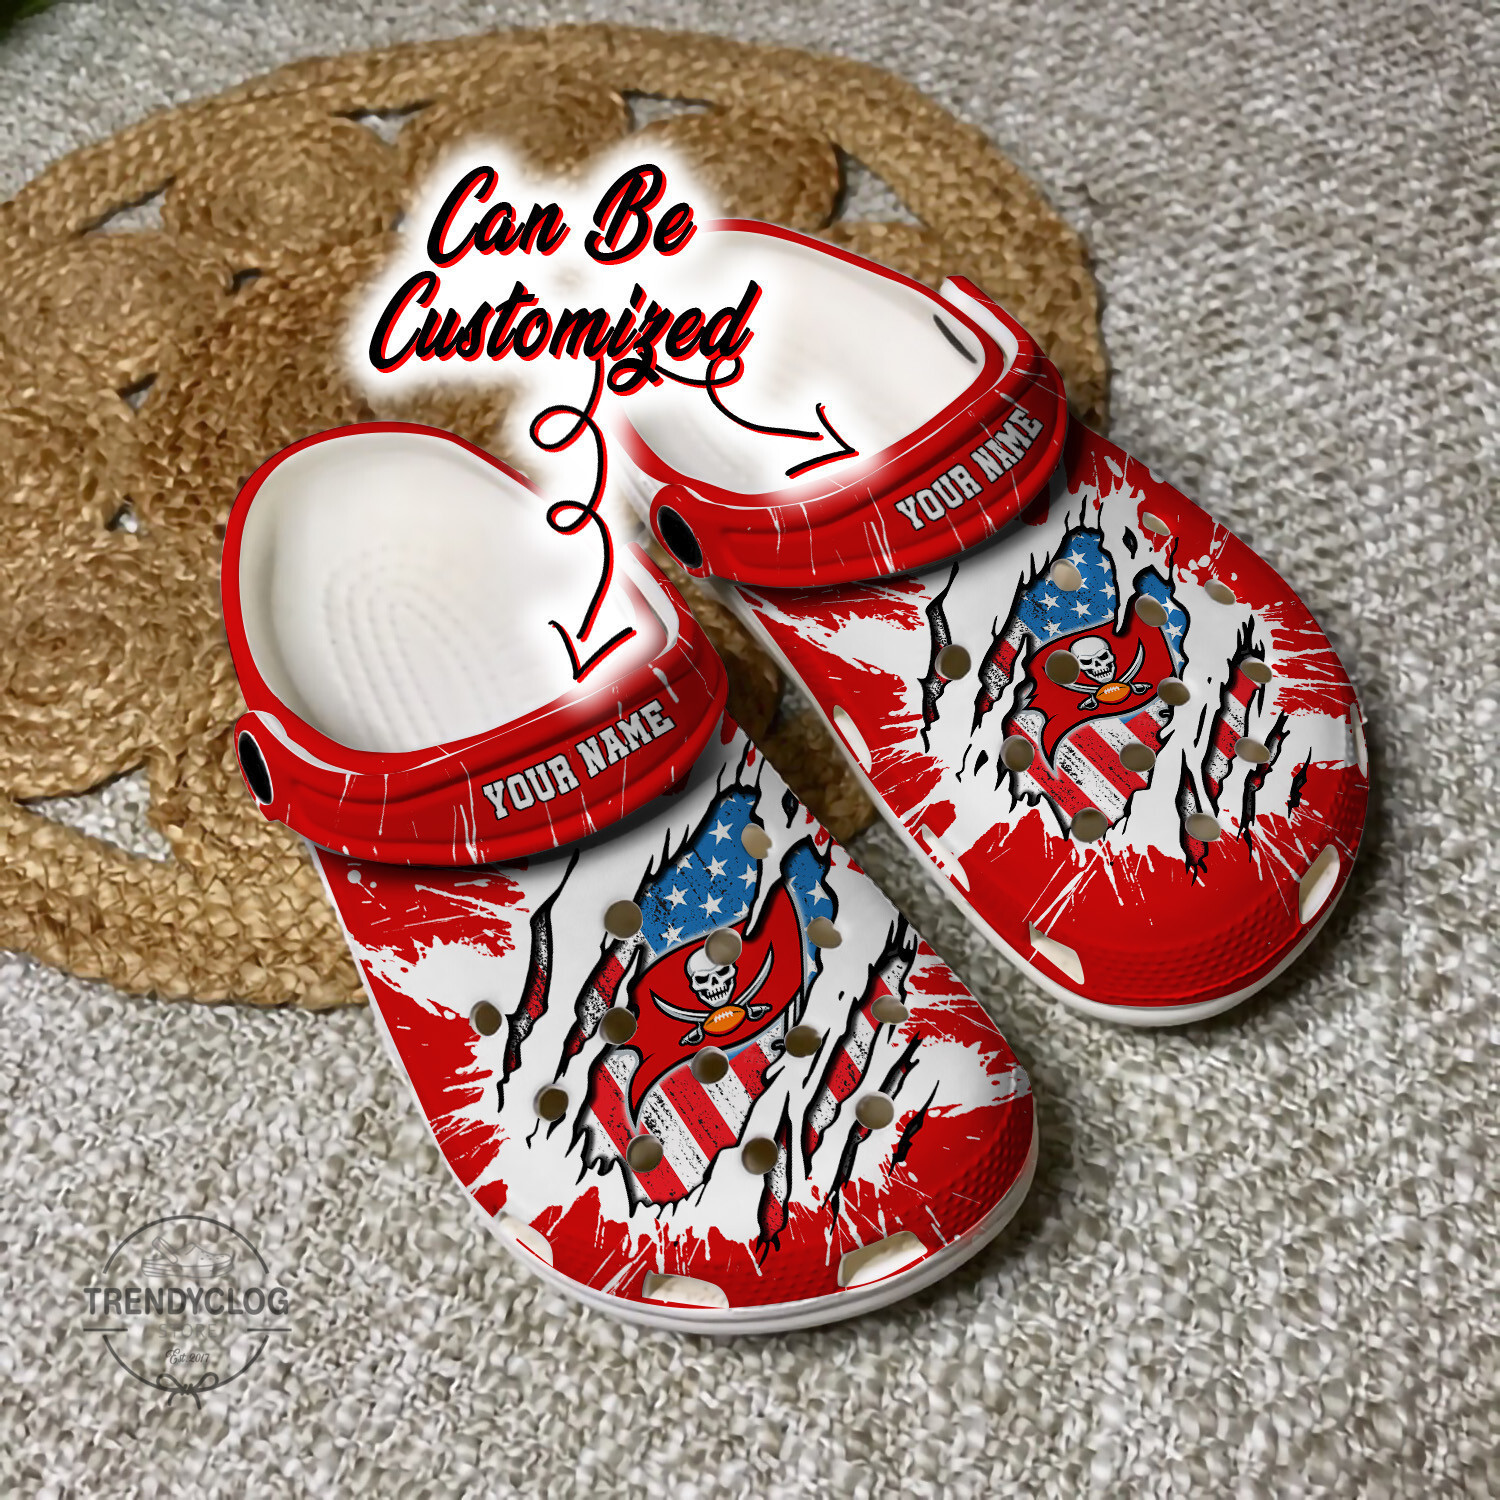 Buccaneers Personalized TB Buccaneers Football Ripped American Flag Clog Crocs Shoes